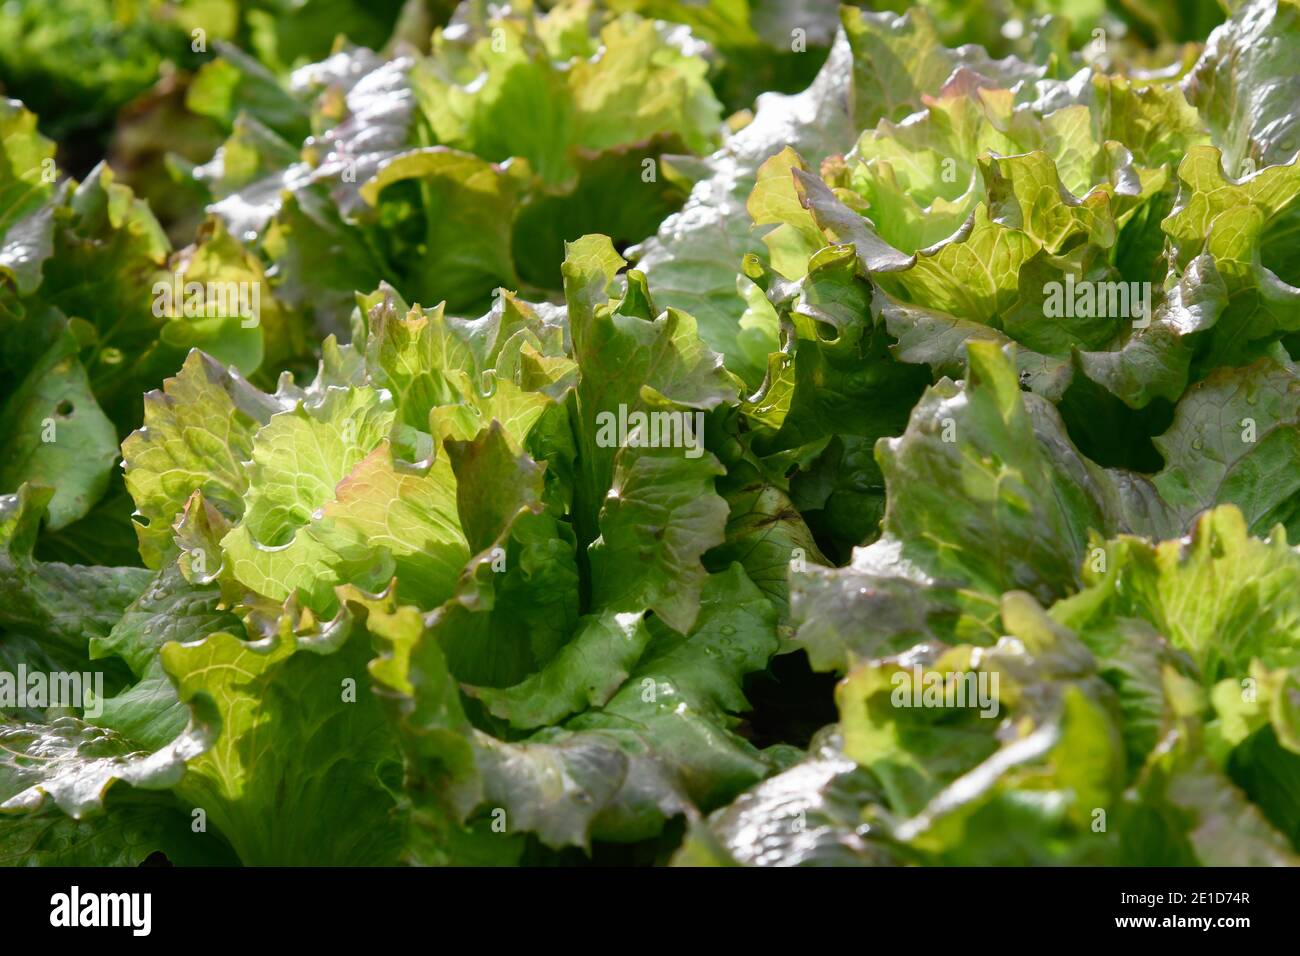 Closeup of a lettuce plant of the marvel variety Stock Photo